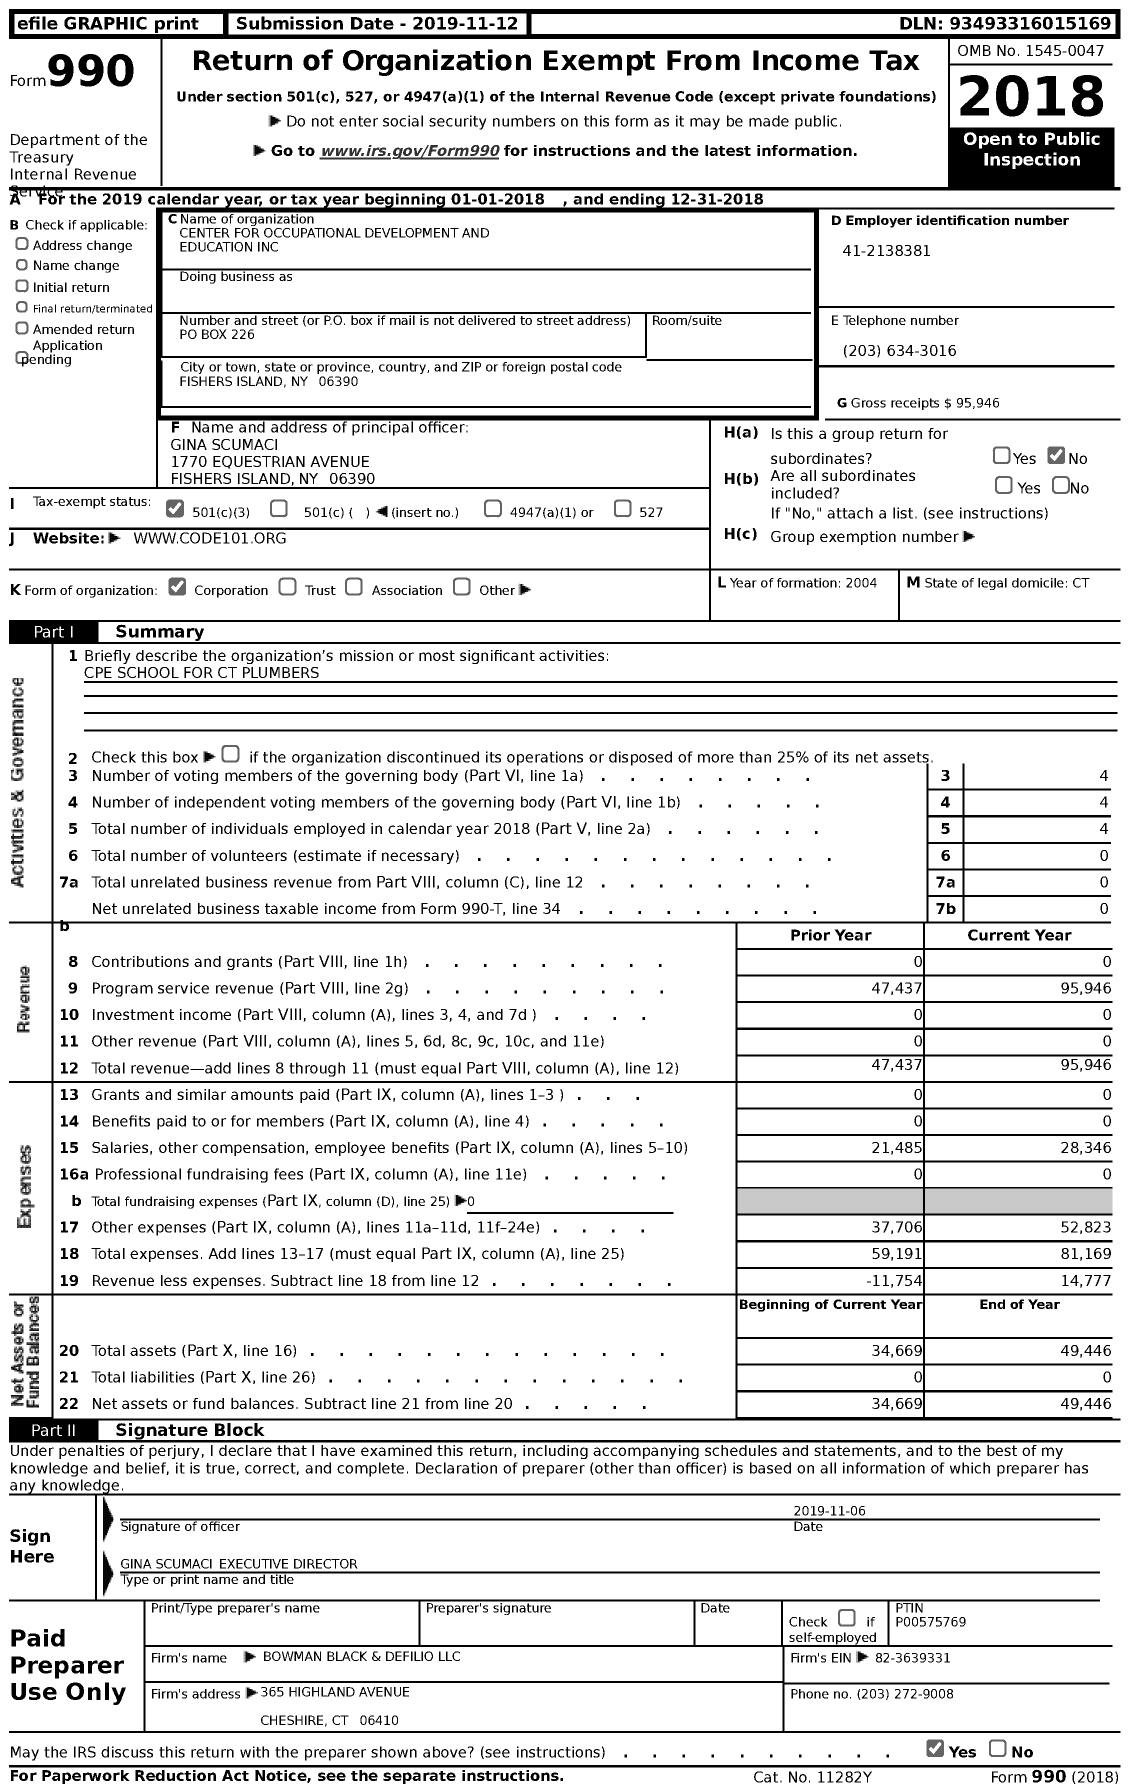 Image of first page of 2018 Form 990 for Center for Occupational Development and Education